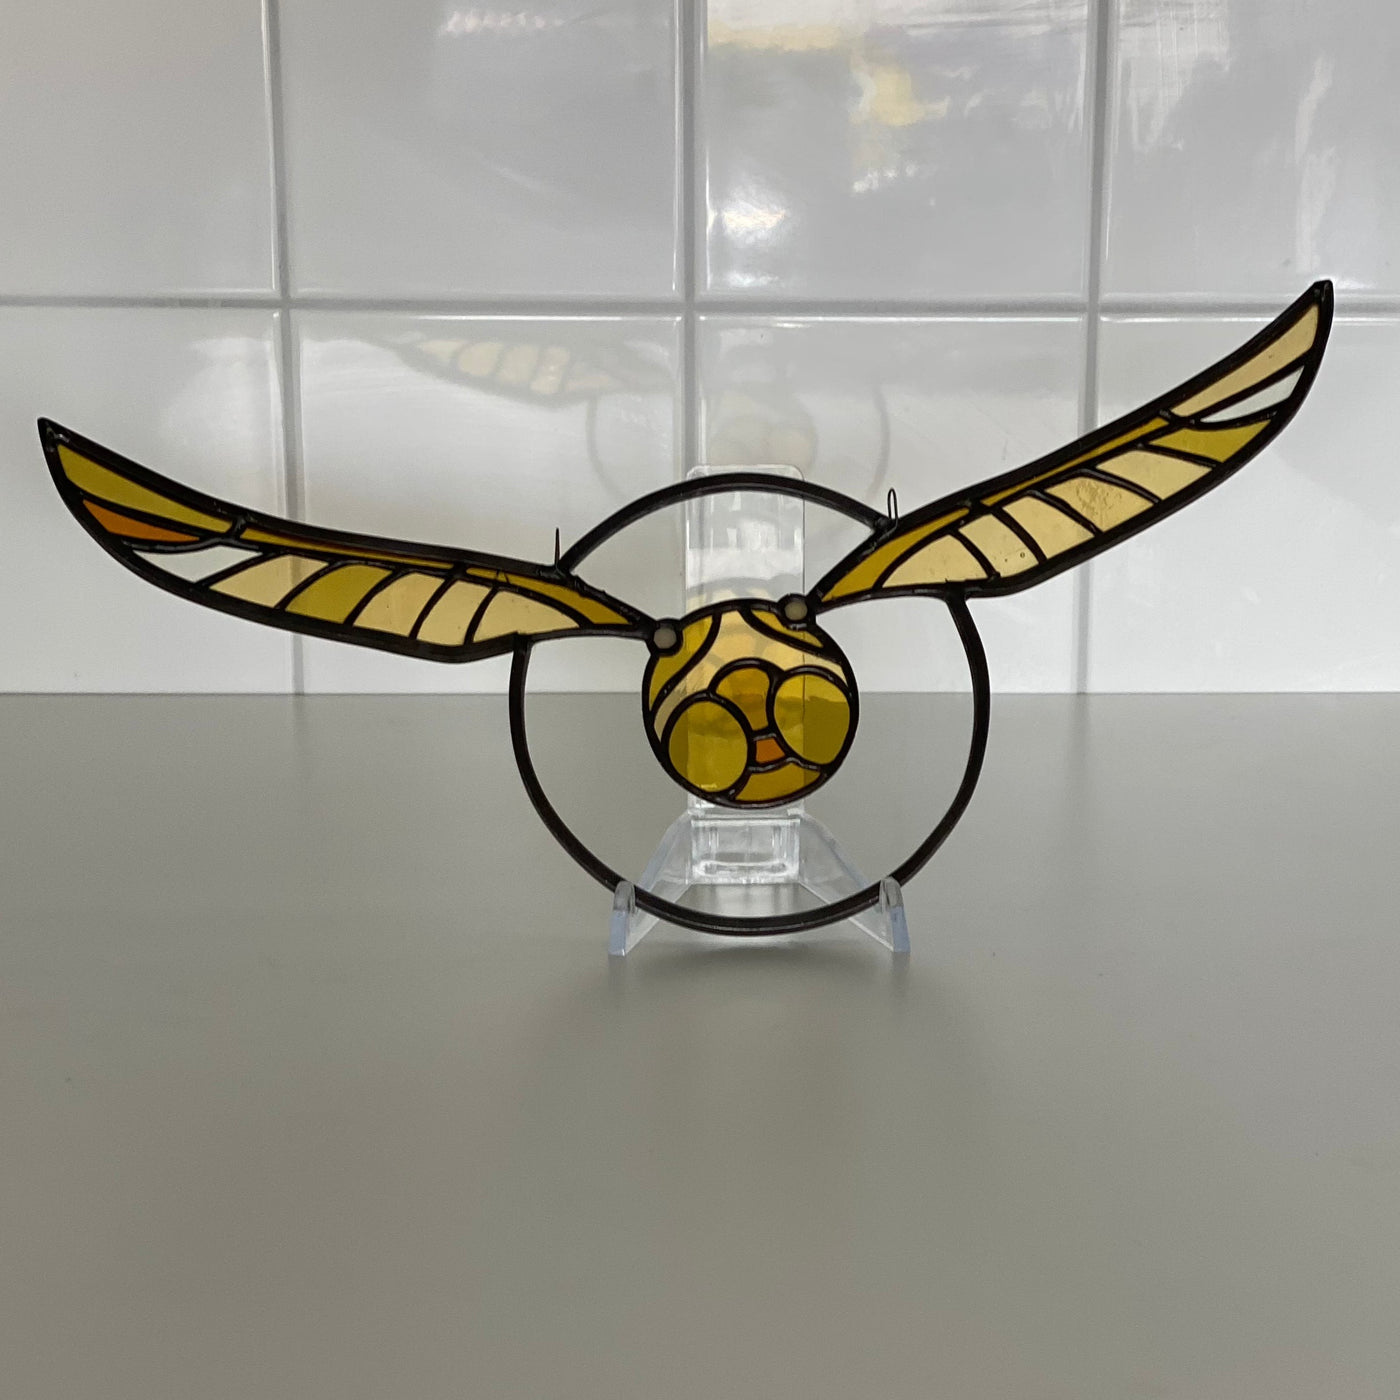 Golden Snitch Inspired Stained Glass Art